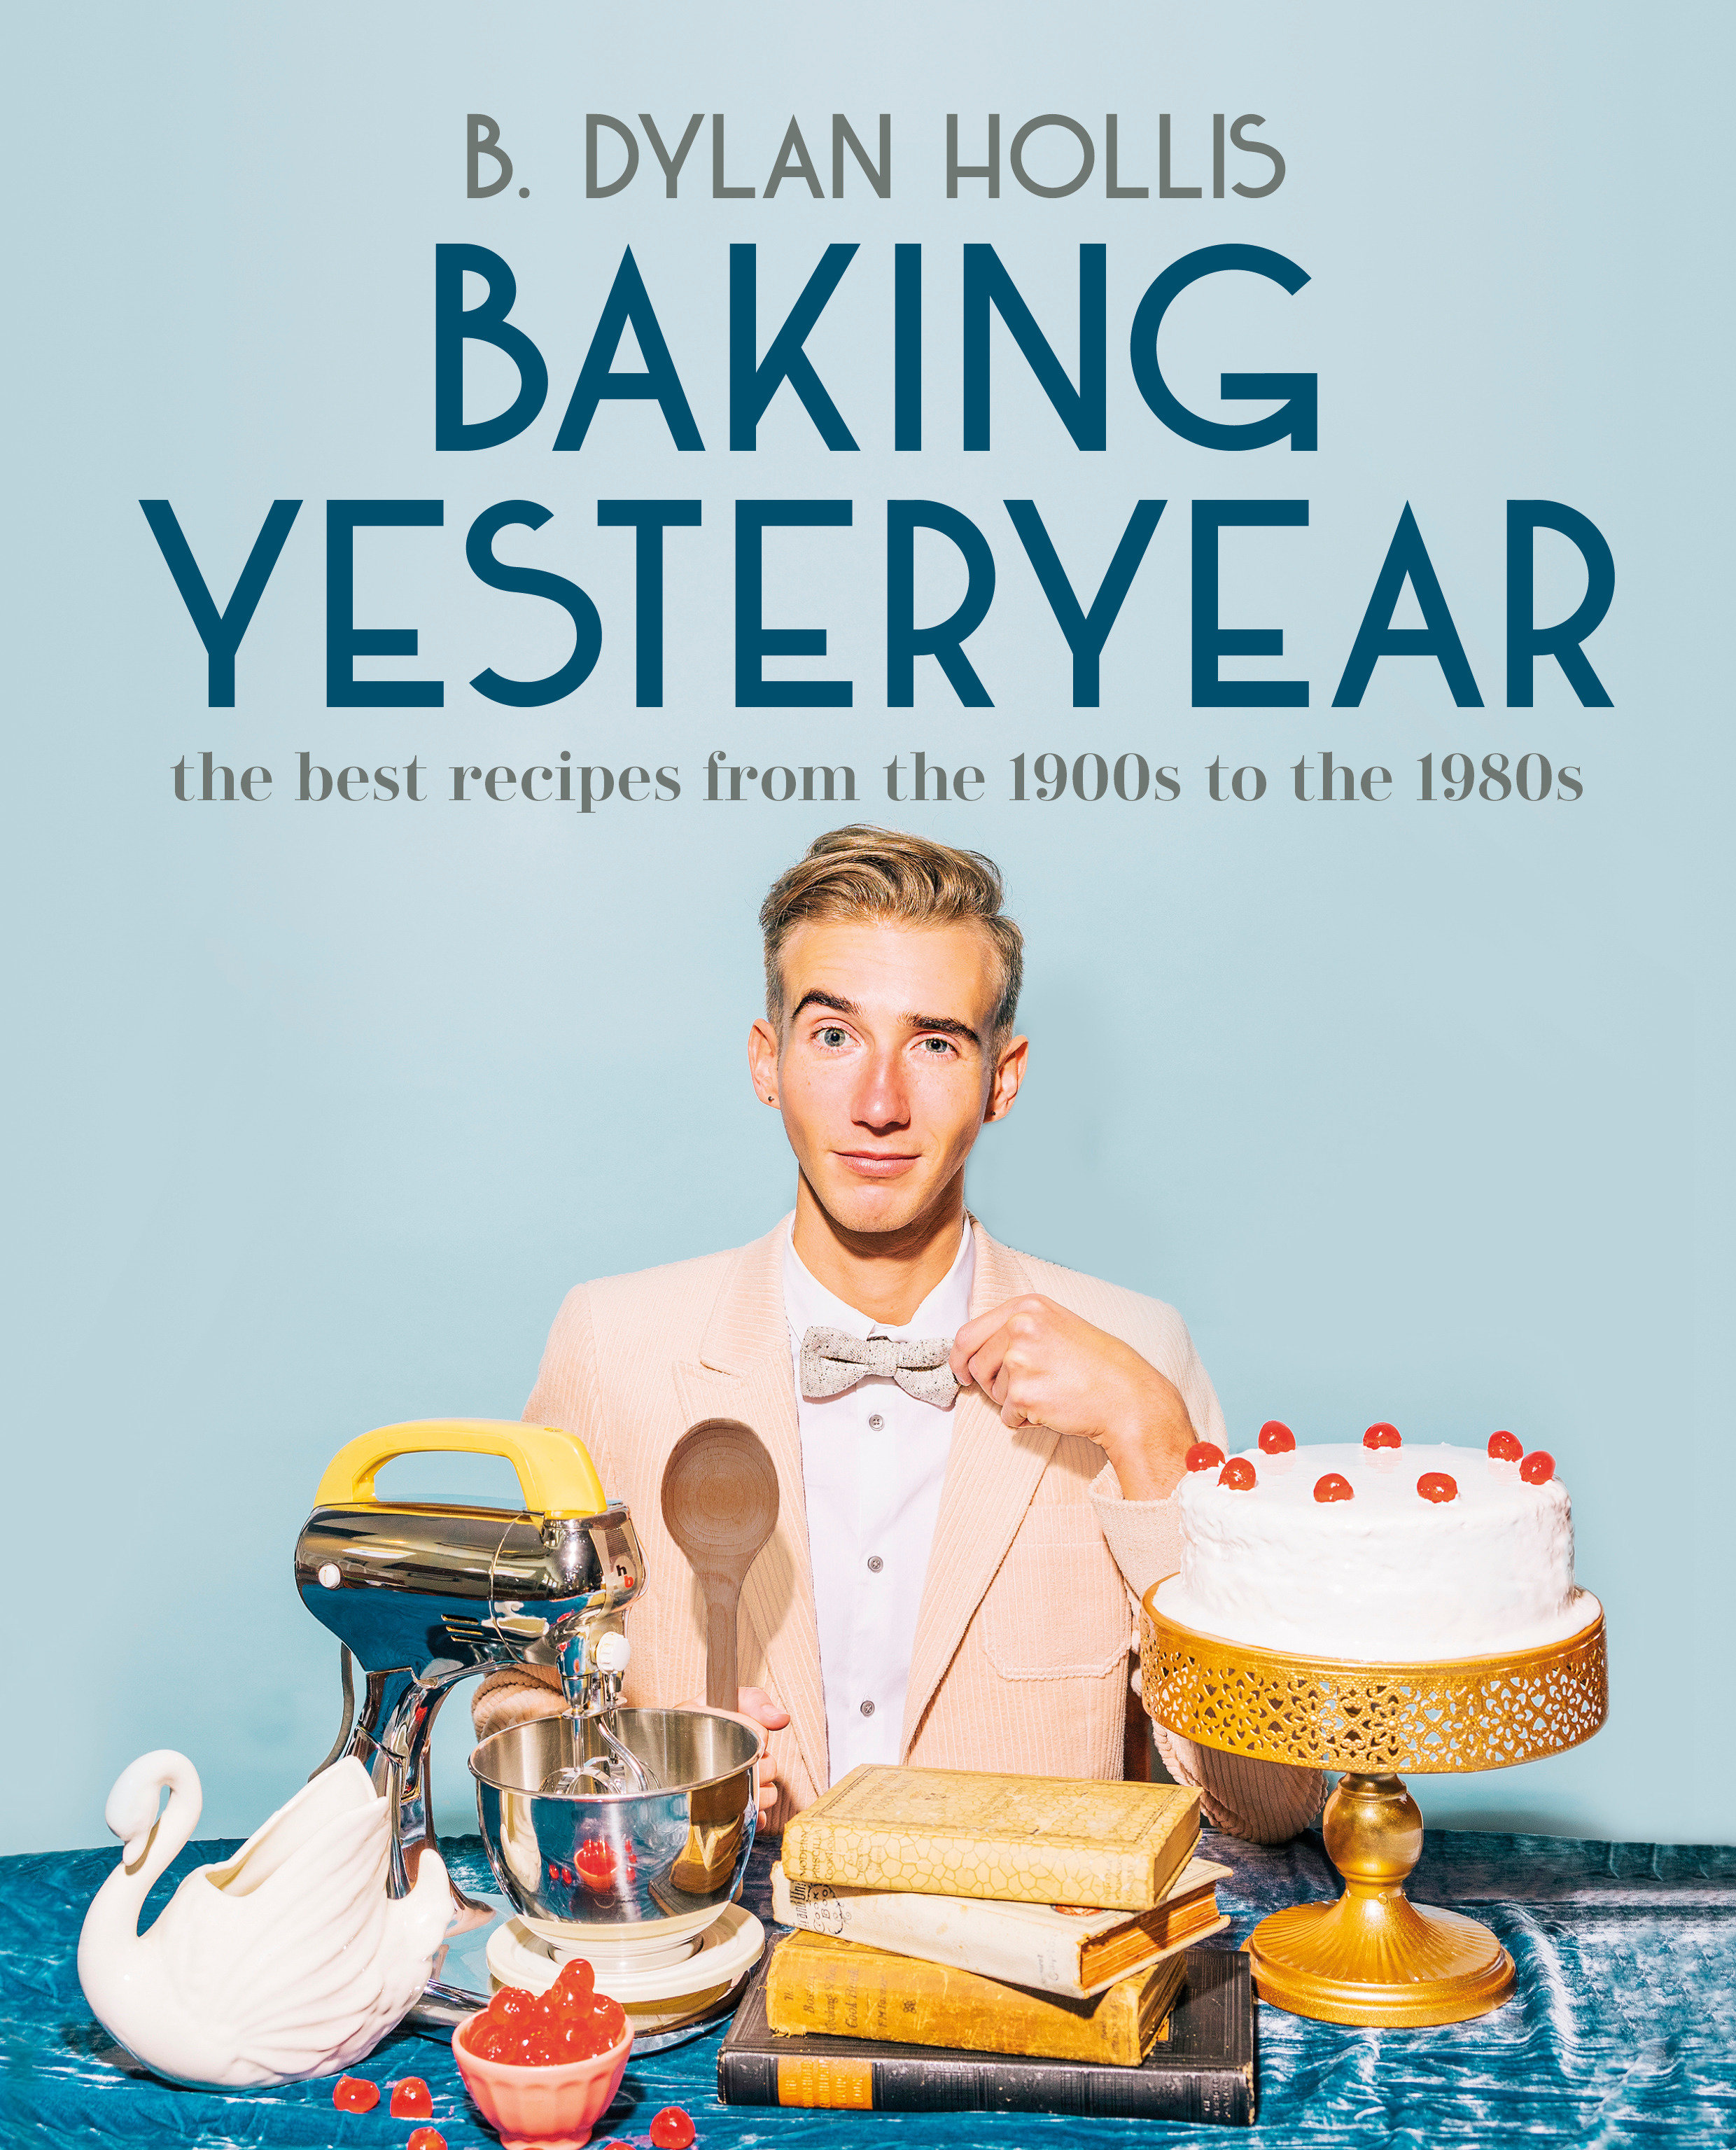 Baking Yesteryear The Best Recipes from the 1900s to the 1980s cover image